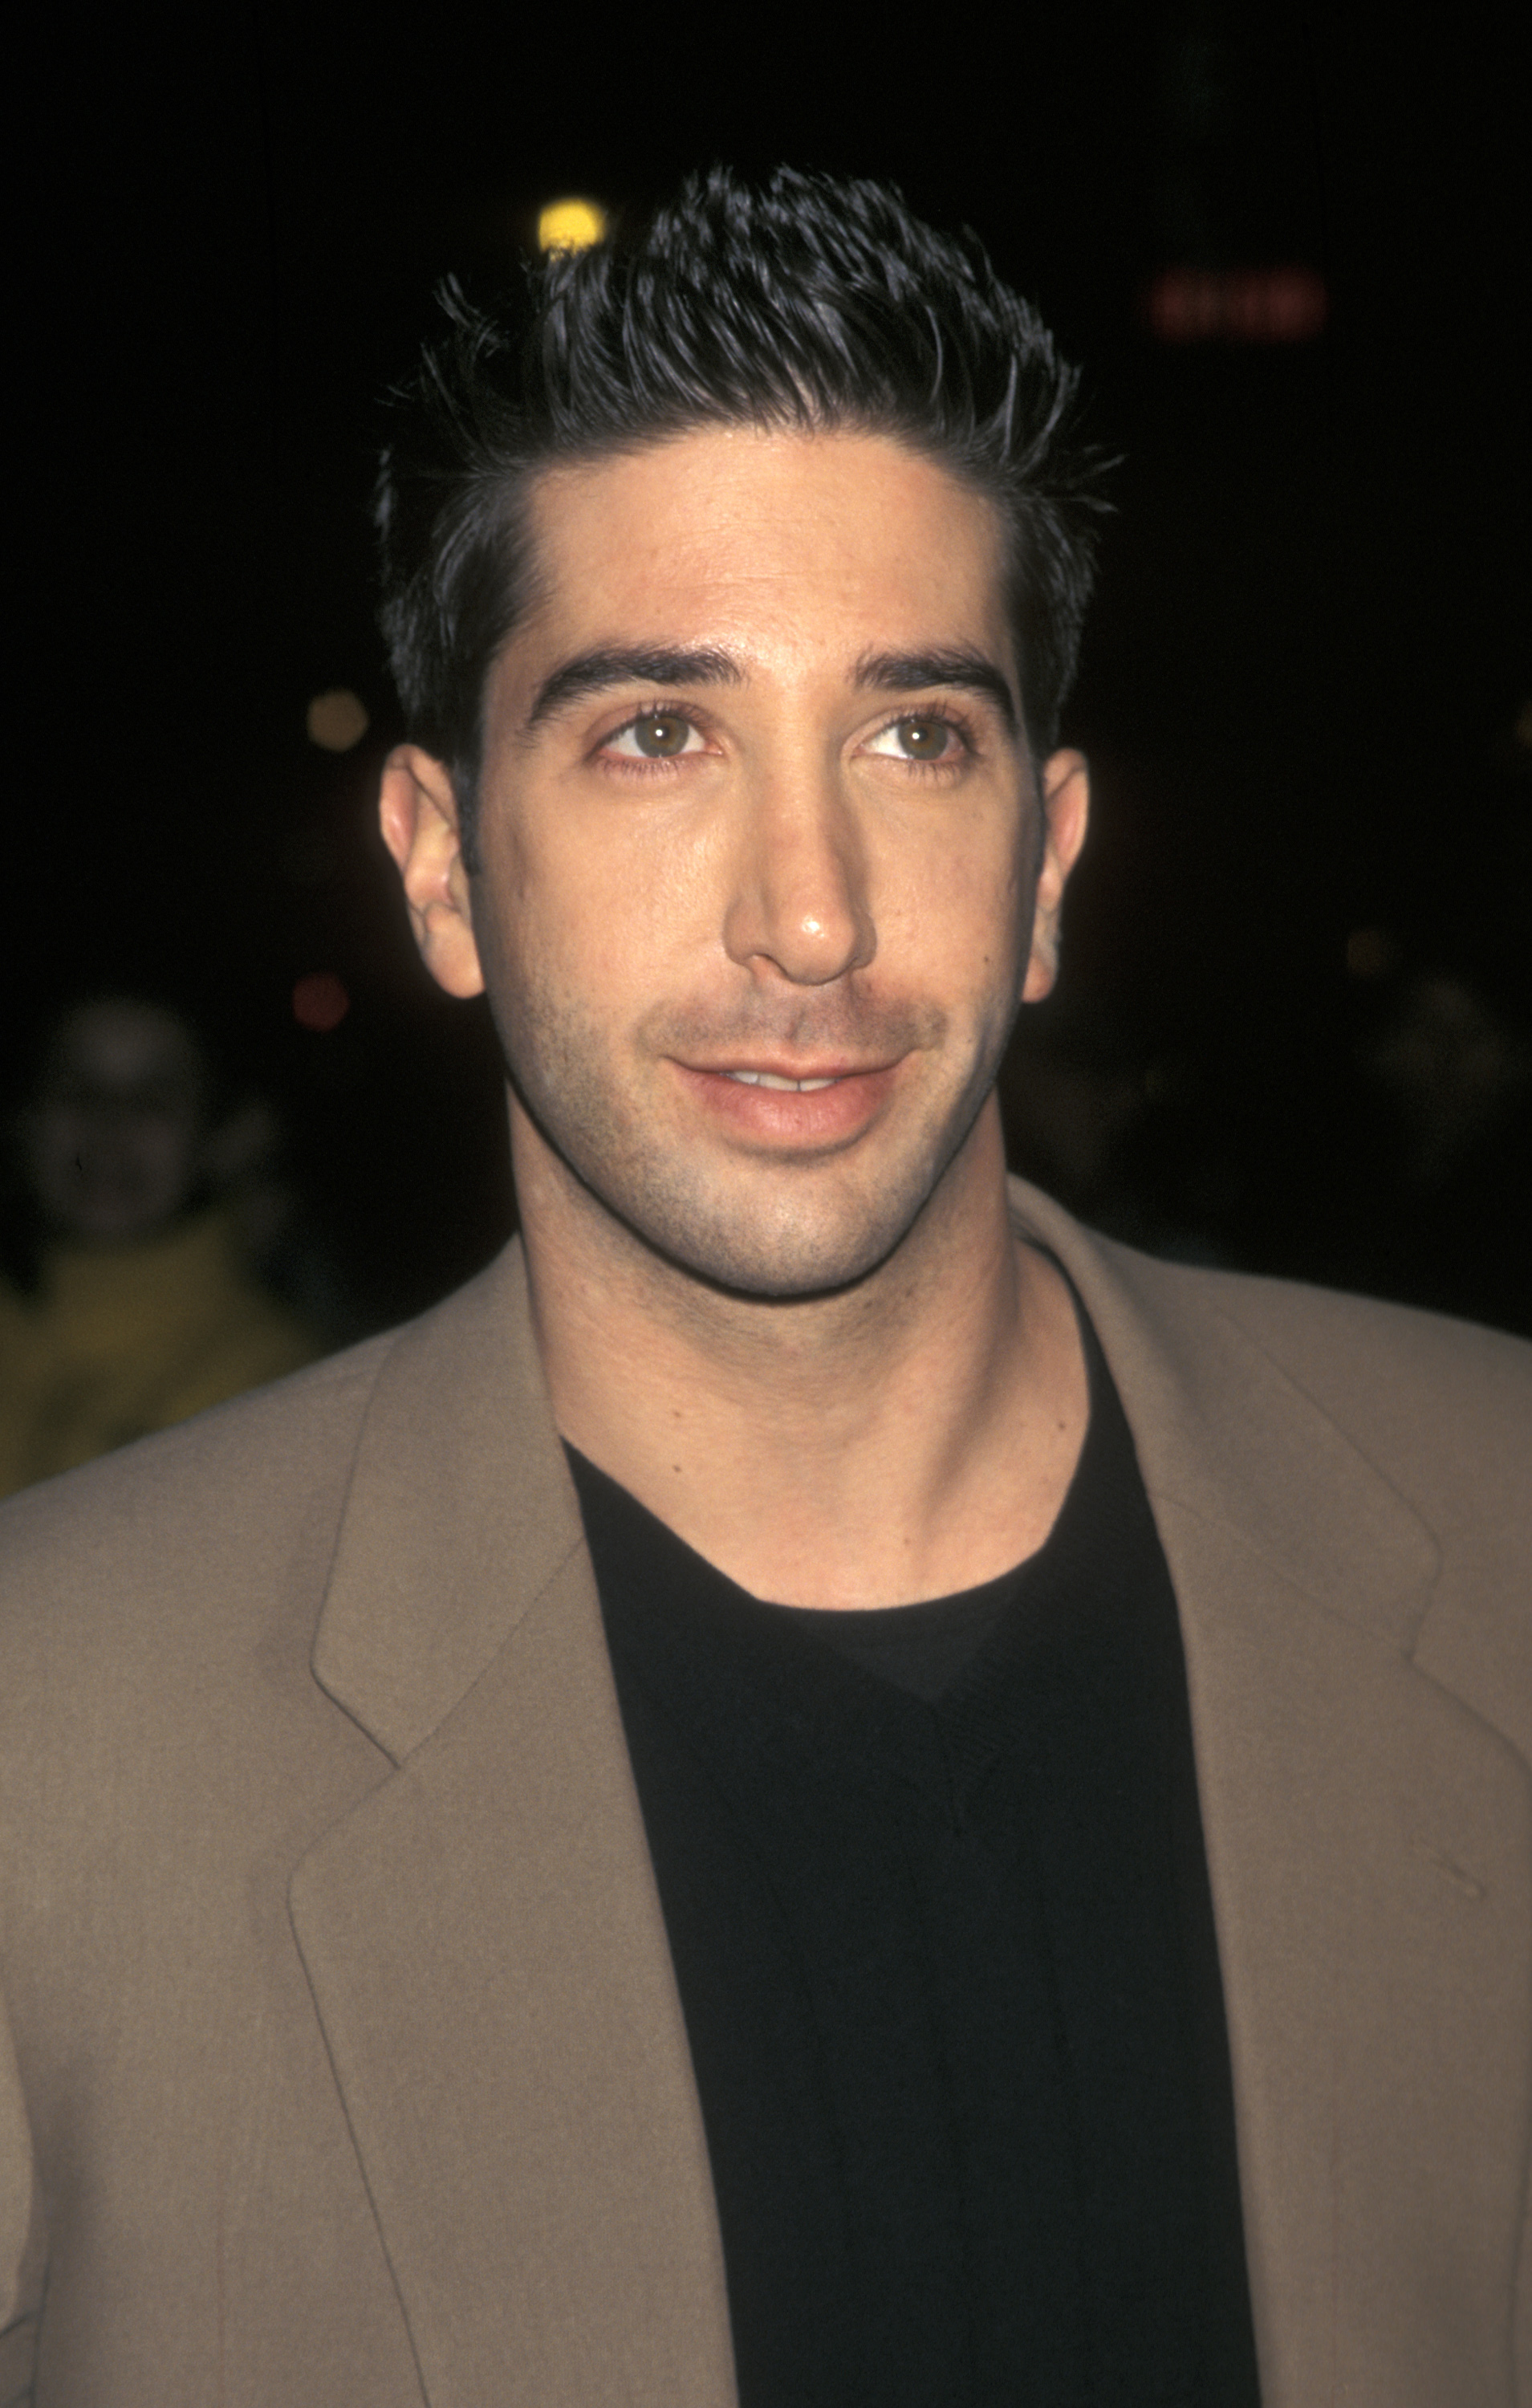 David Schwimmer during the screening of "Kissing a Fool" on February 26, 1998 in New York City, New York | Source: Getty Images